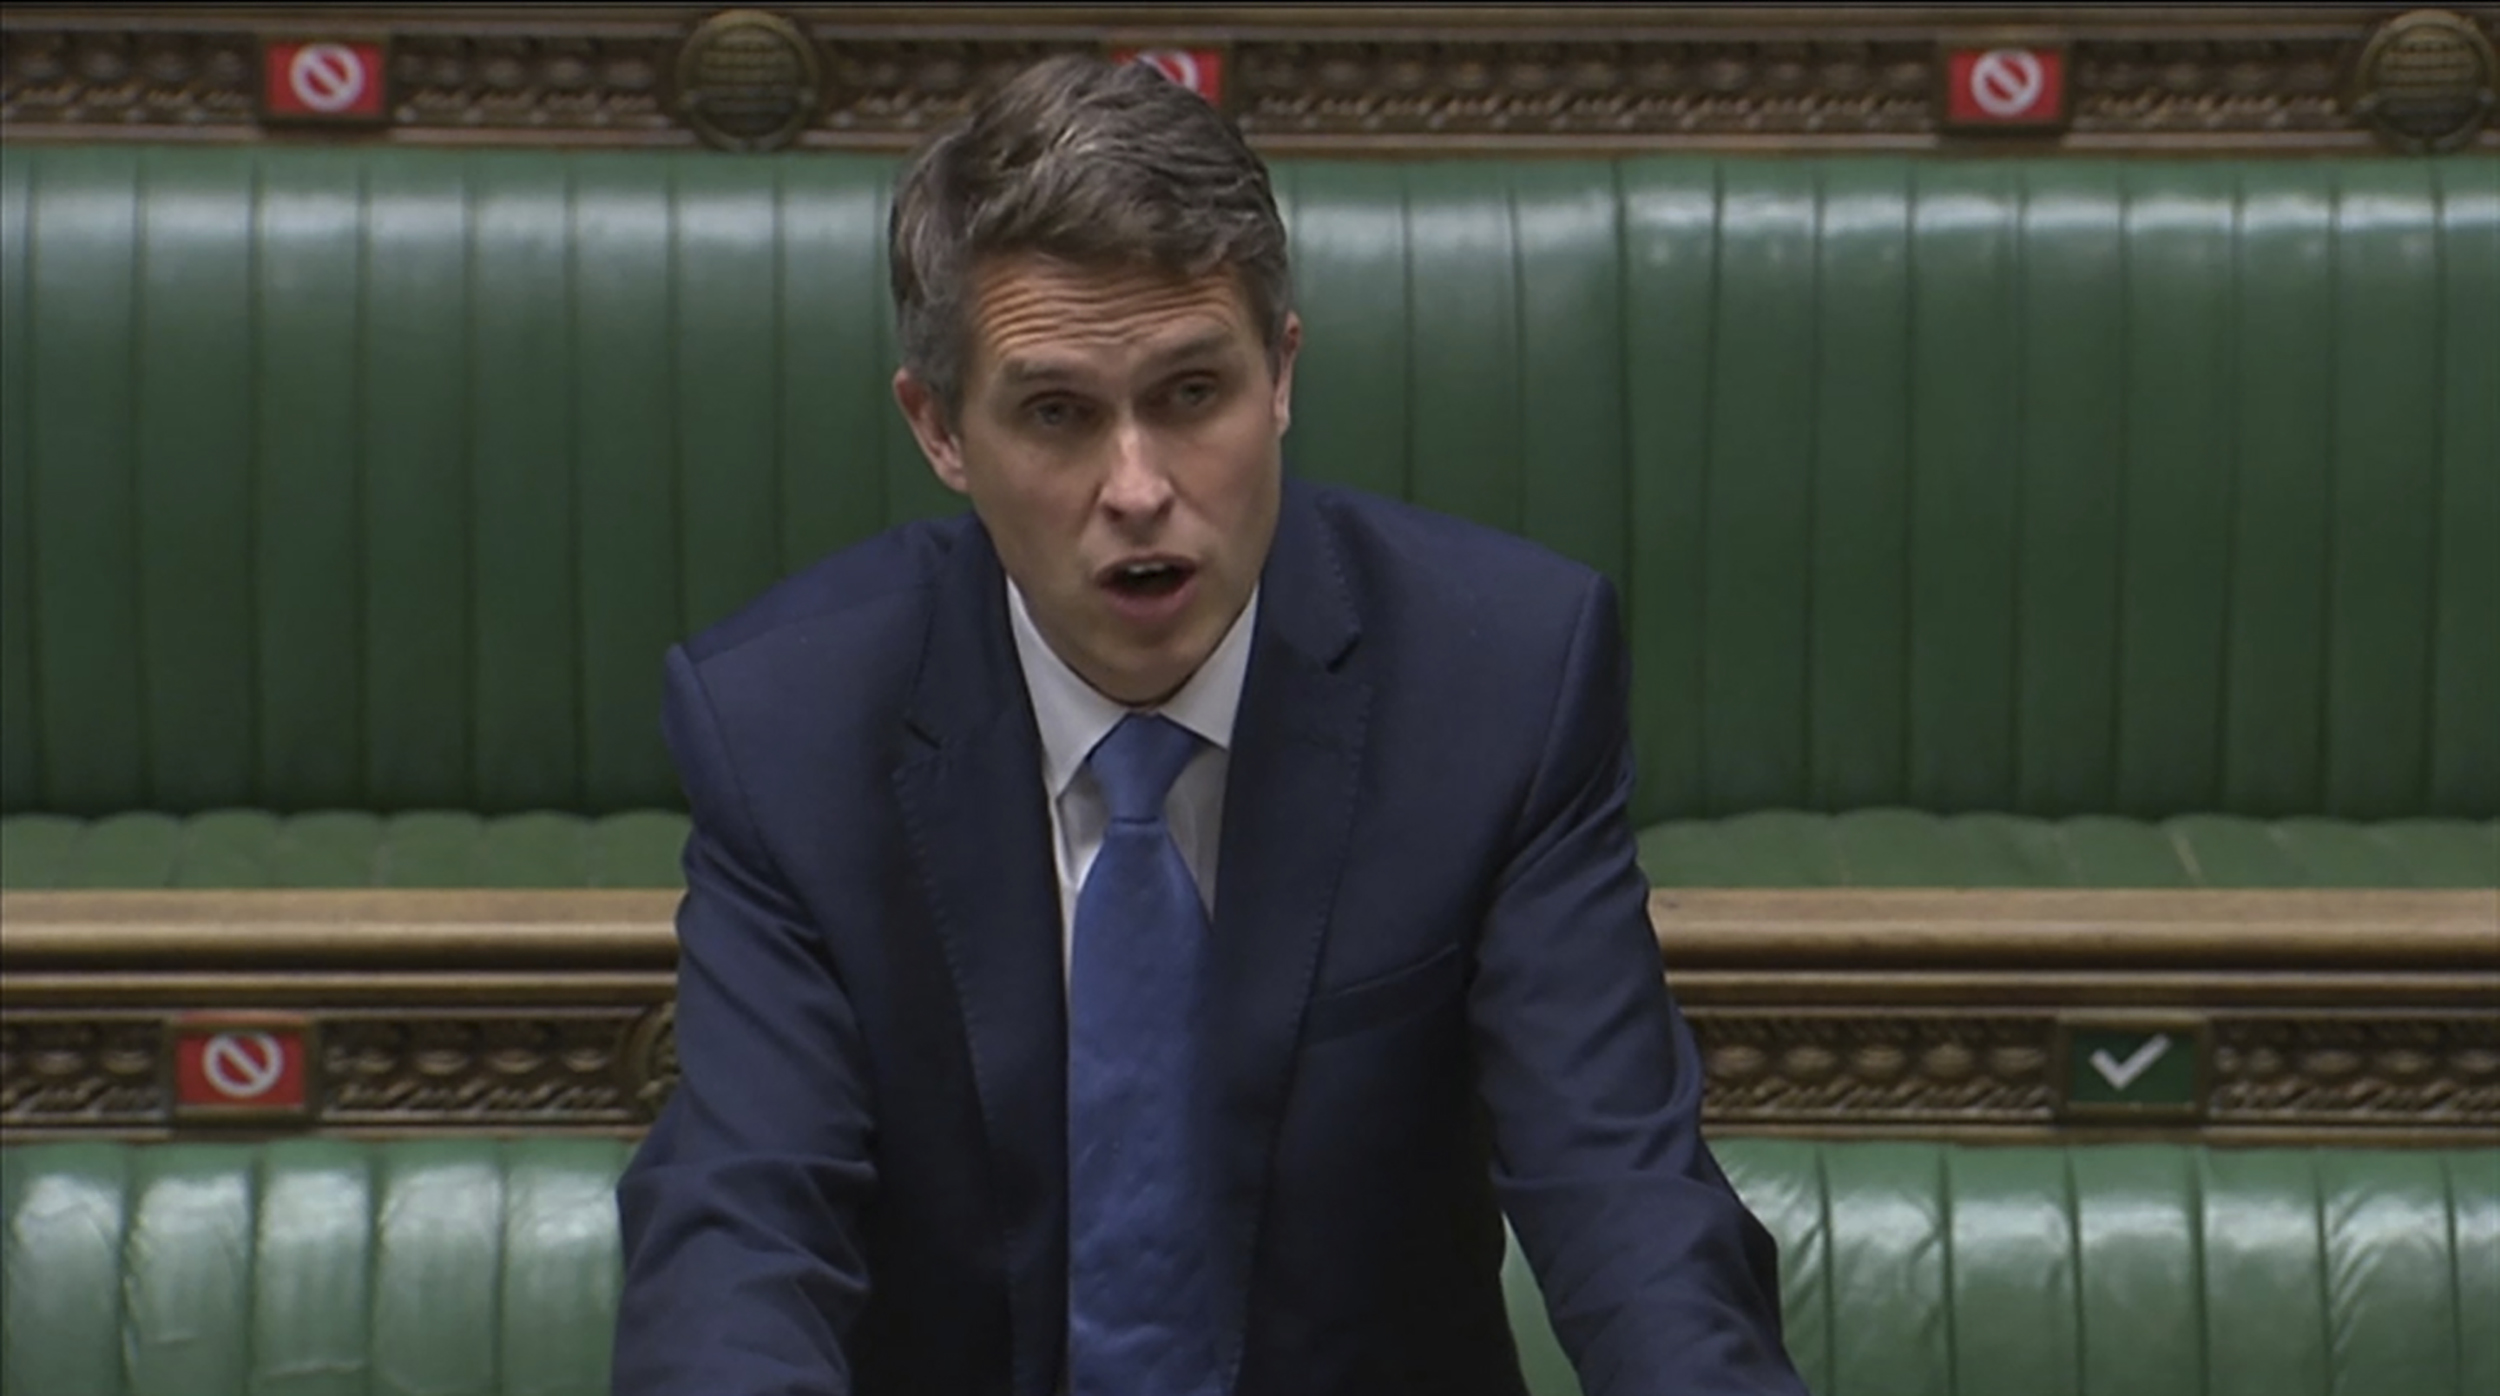 UK Education Secretary Gavin Williamson answers questions in the House of Commons on May 13 on the plans for reopening schools.